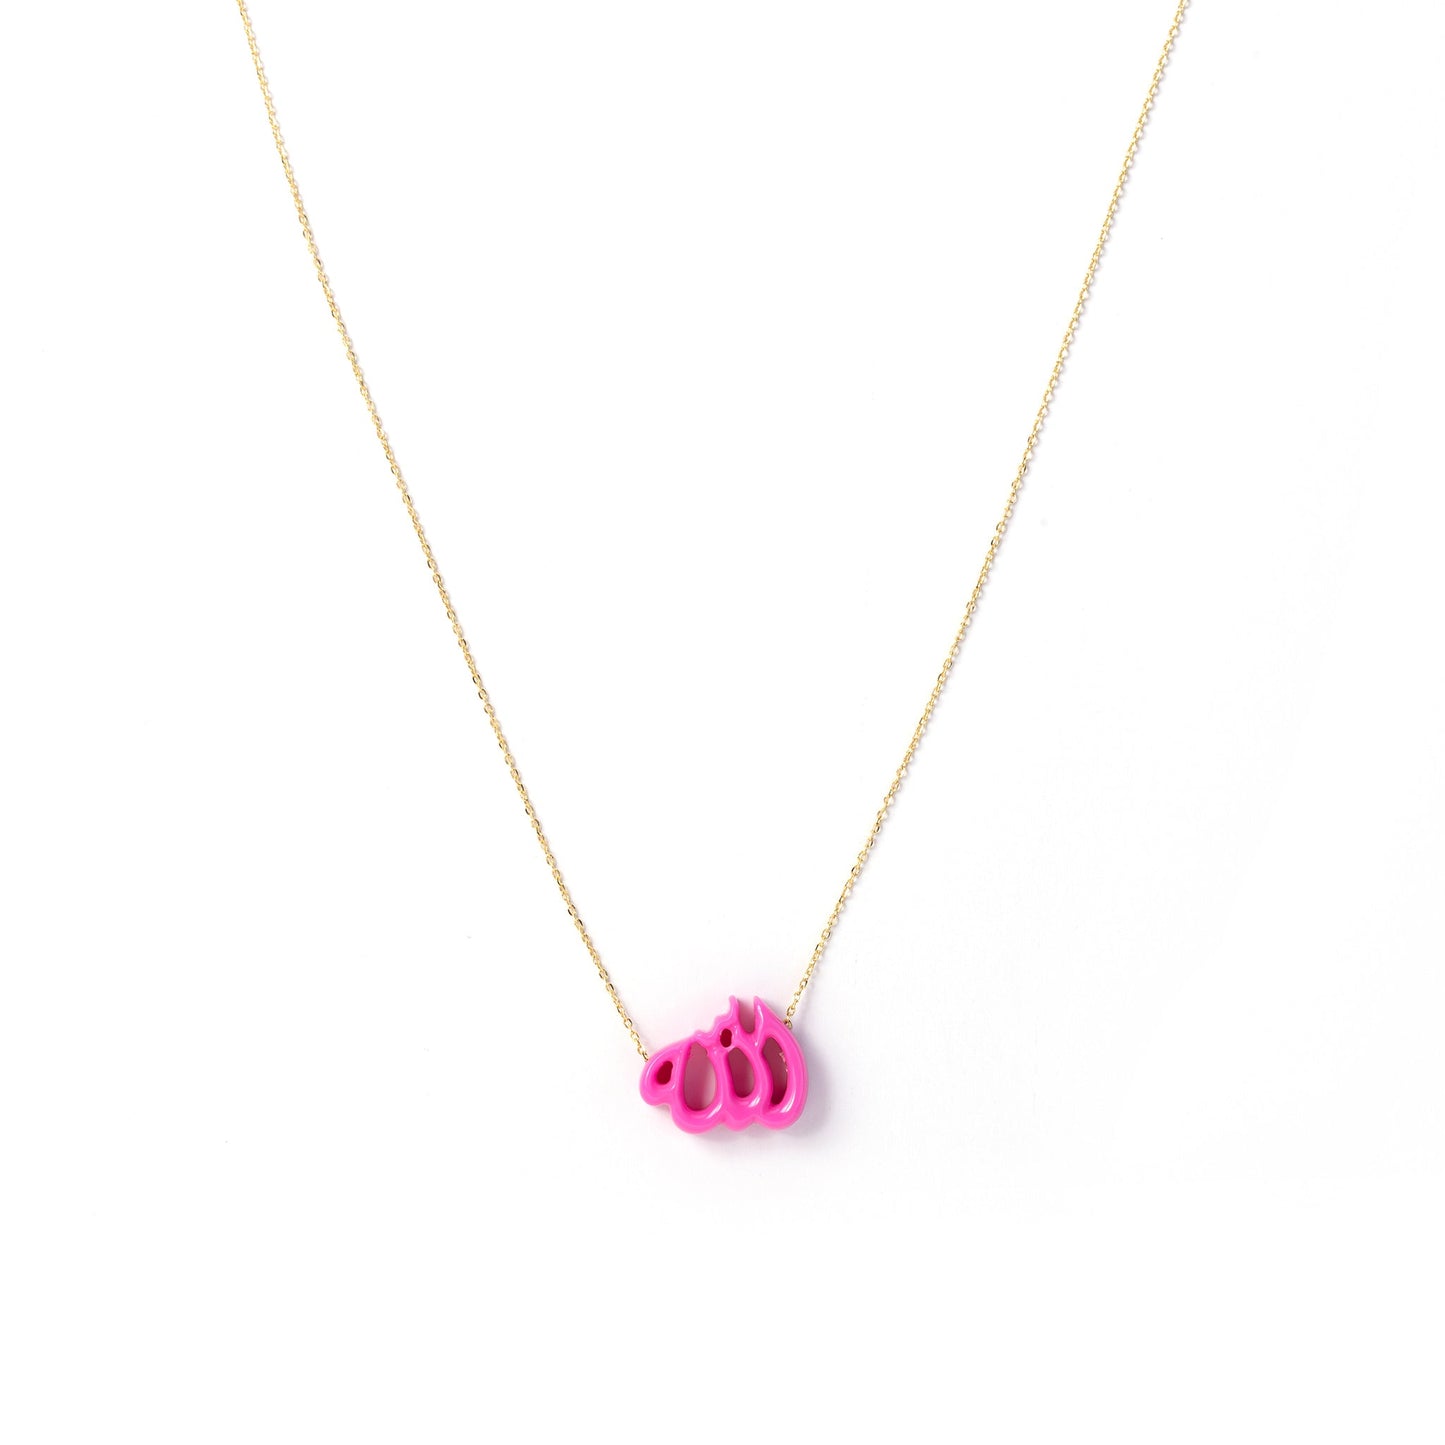 The Pink Eternal necklace - Oria.jewelry